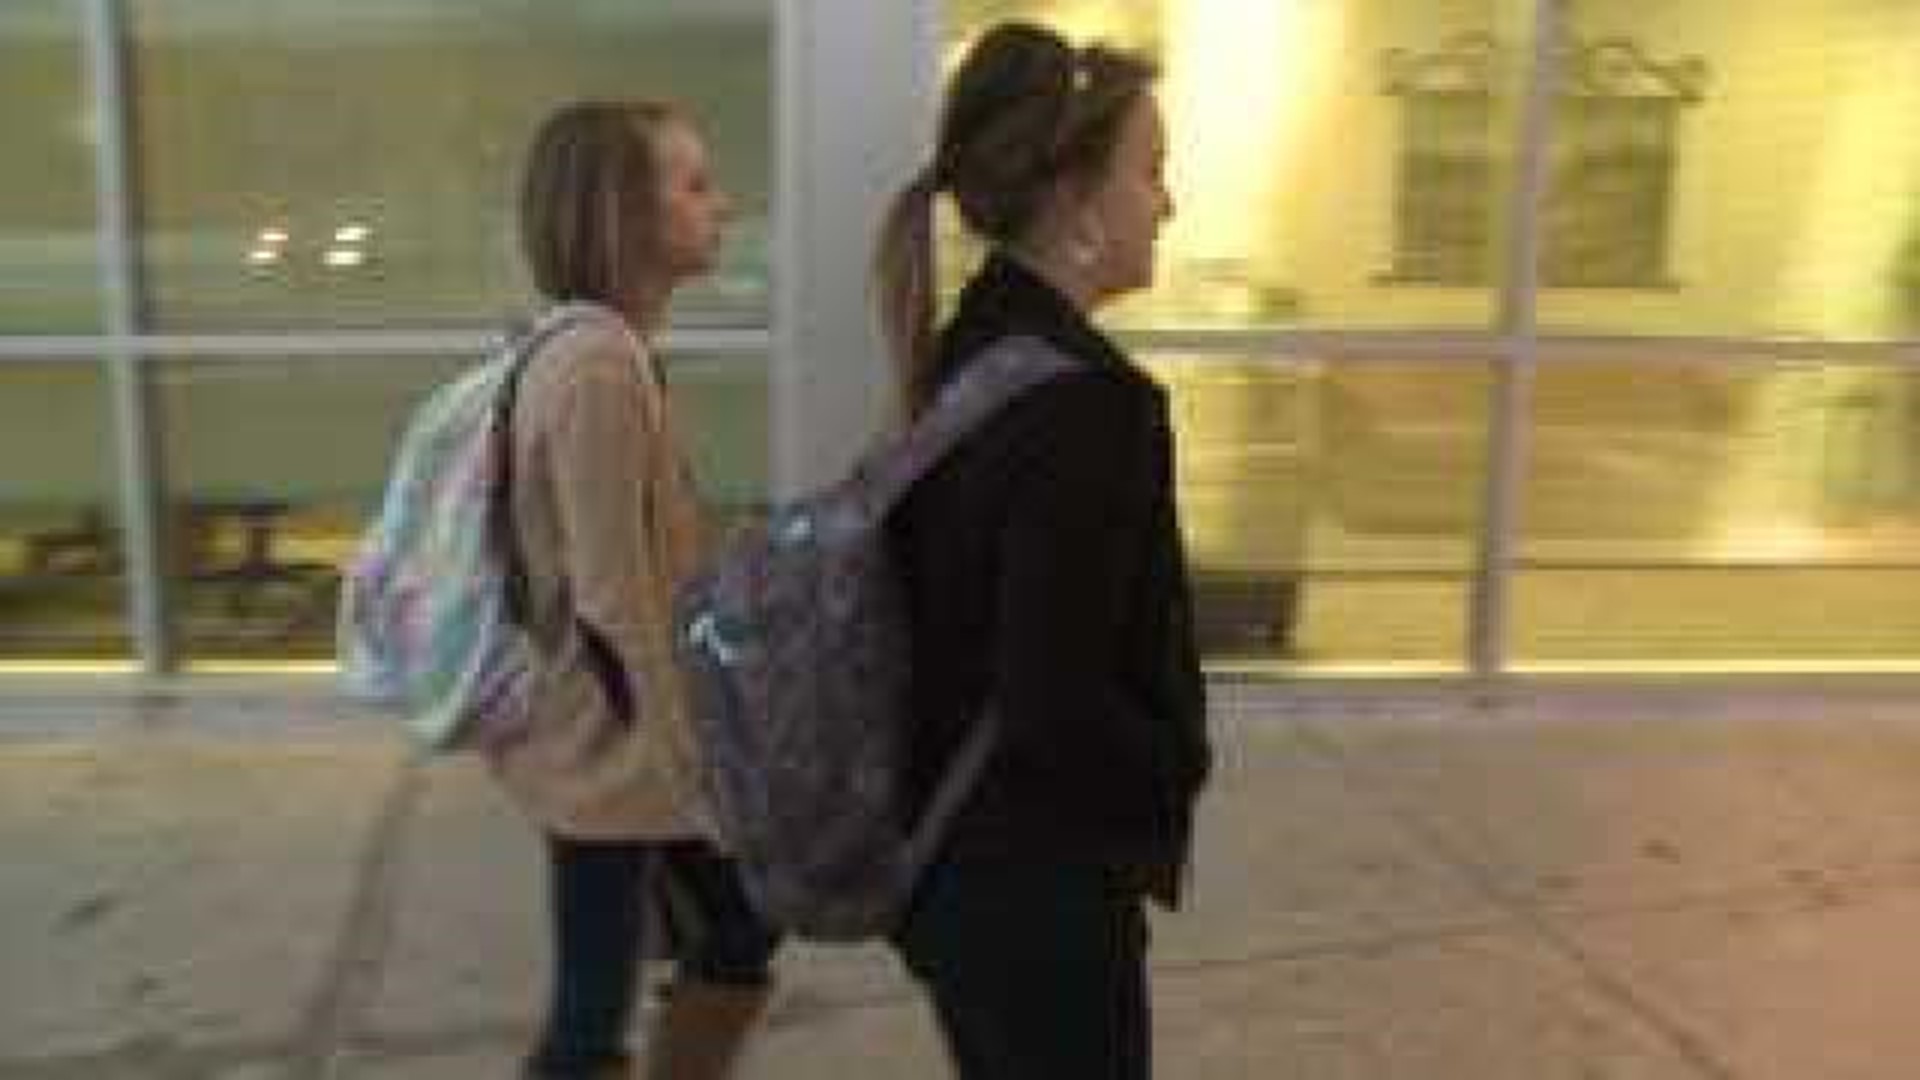 Students Head Back to School After Snow Days